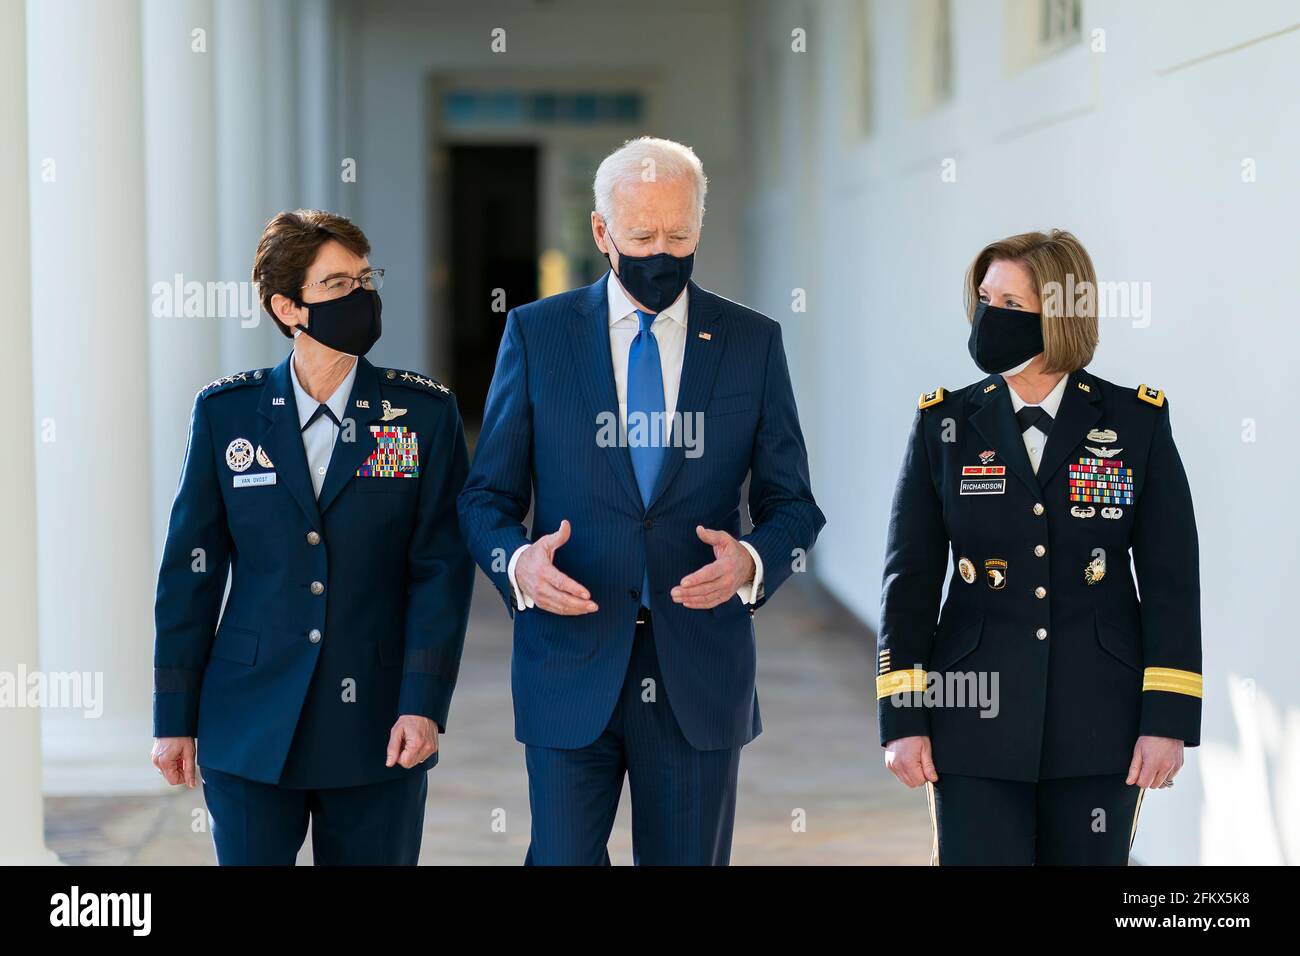 President Joe Biden walks along the Colonnade with the Combatant Commander nominees U.S. Air Force Gen. Jacqueline Van Ovost and U.S. Army Lt. Gen. Laura Richardson on Monday, March 8, 2021, along the Colonnade of the White House. (Official White House Photo by Adam Schultz) Stock Photo